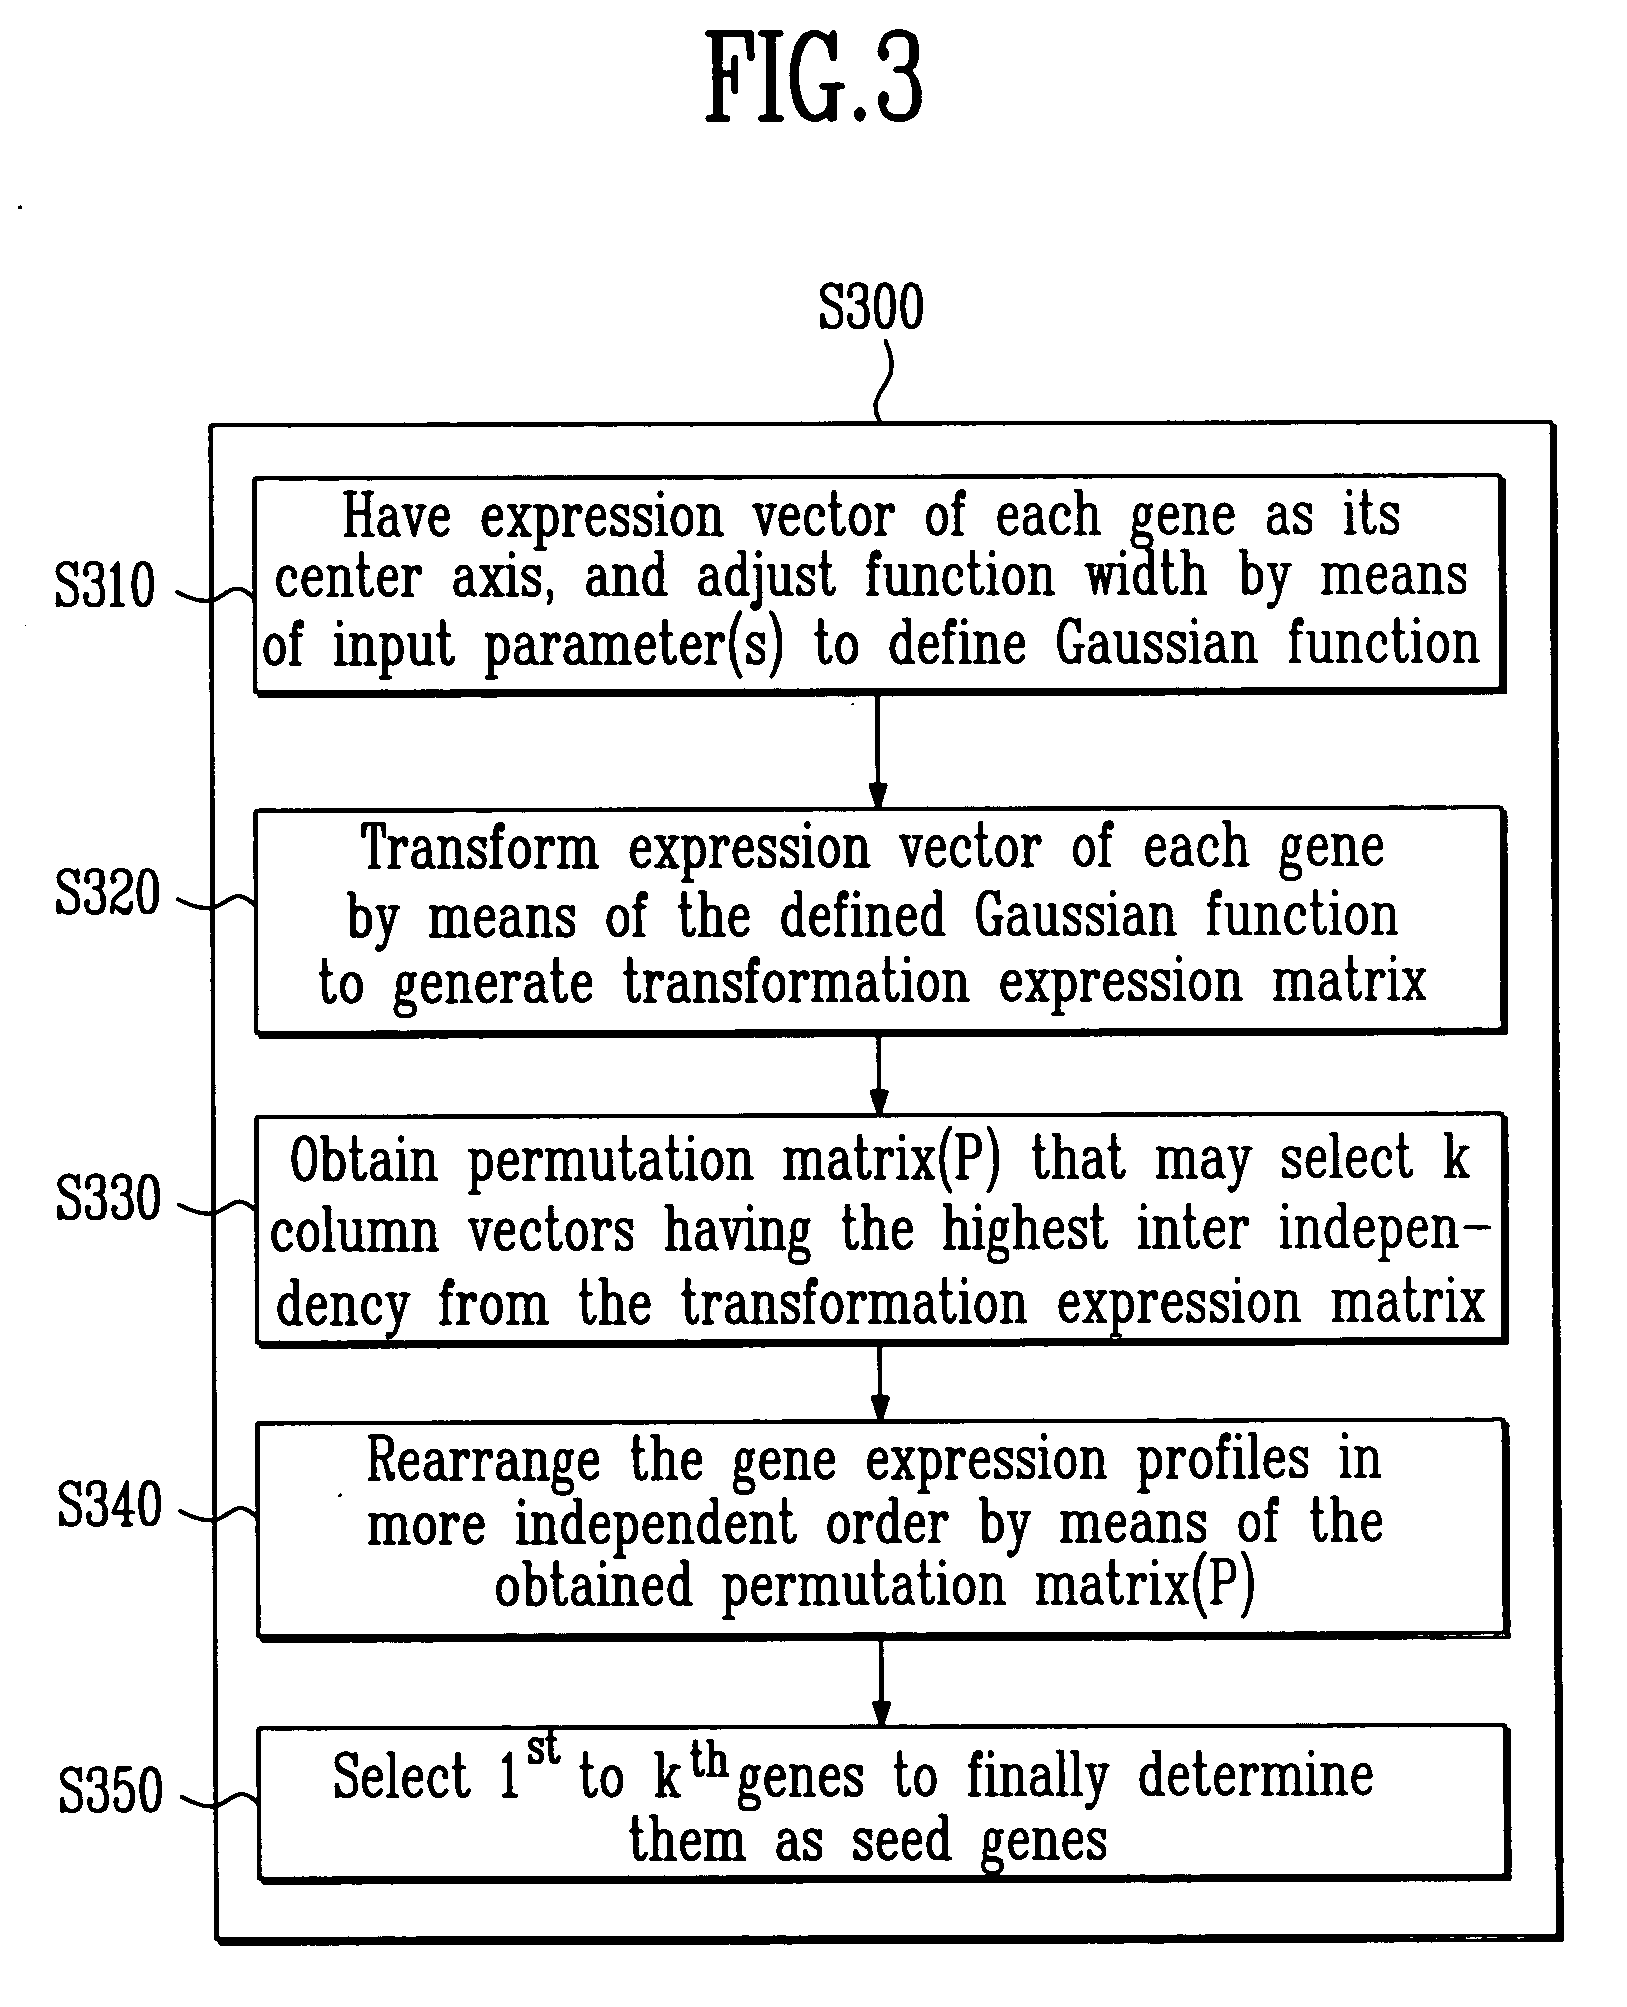 Method for identifying relevant groups of genes using gene expression profiles